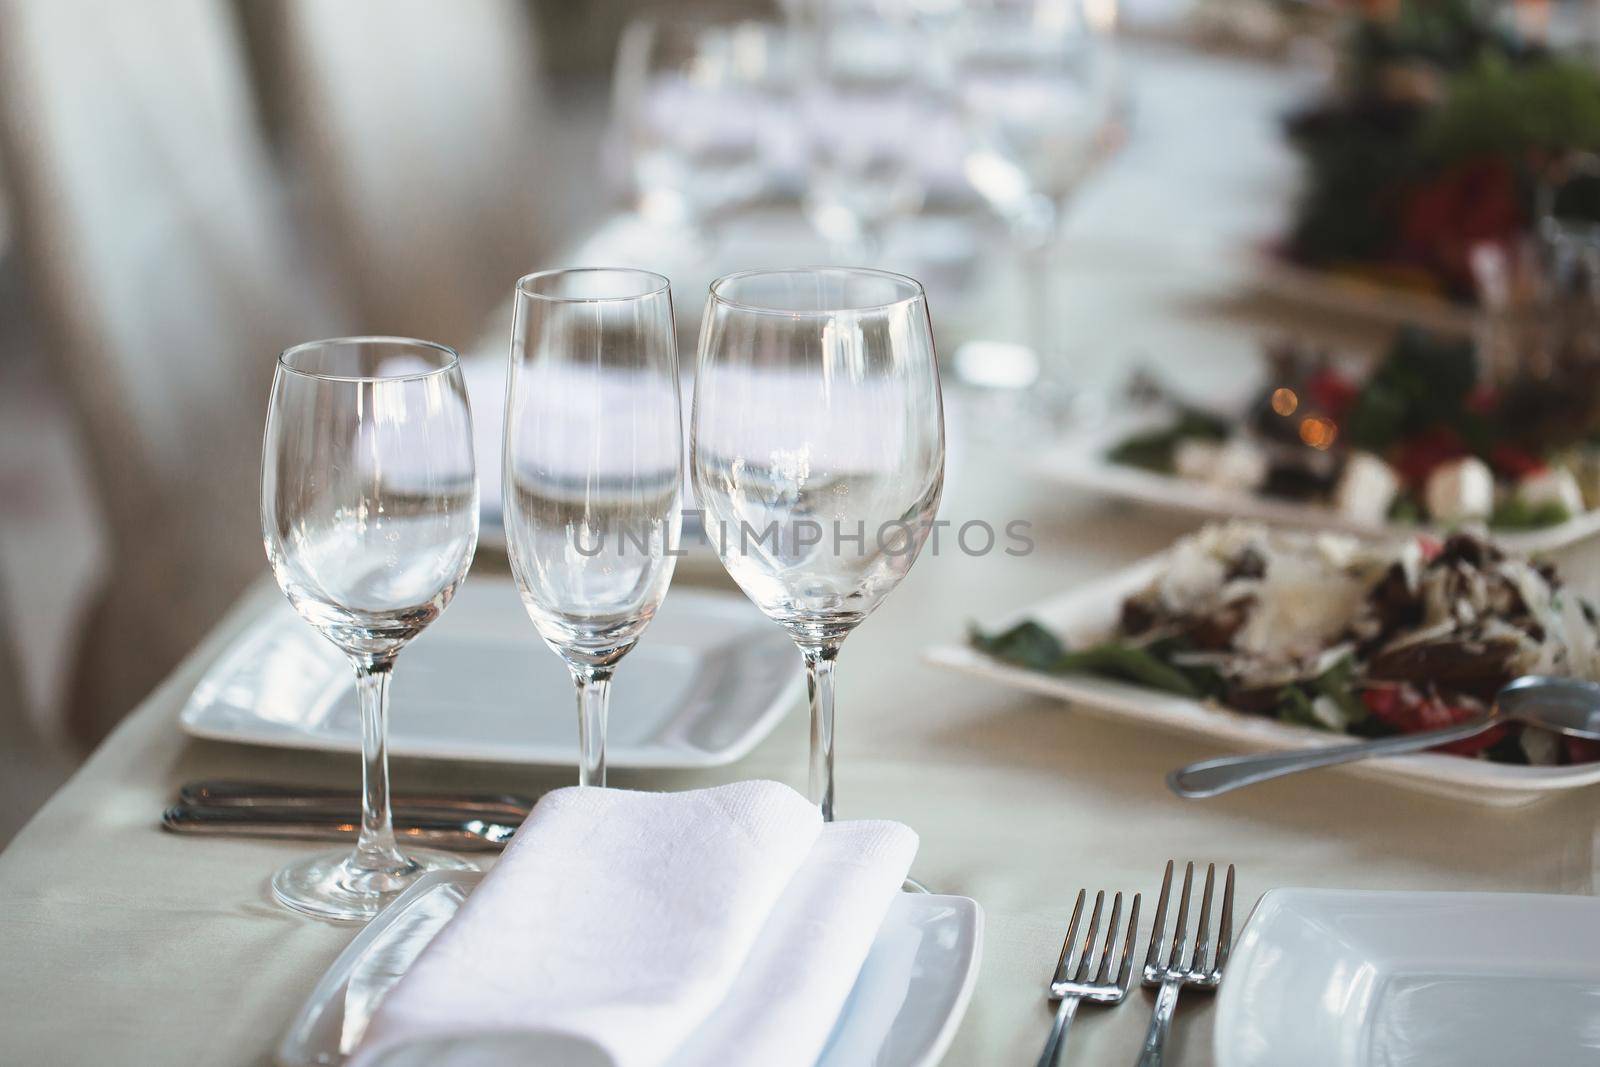 Table at a luxury wedding reception. Beautiful flowers on the table. Serving dishes, glass glasses